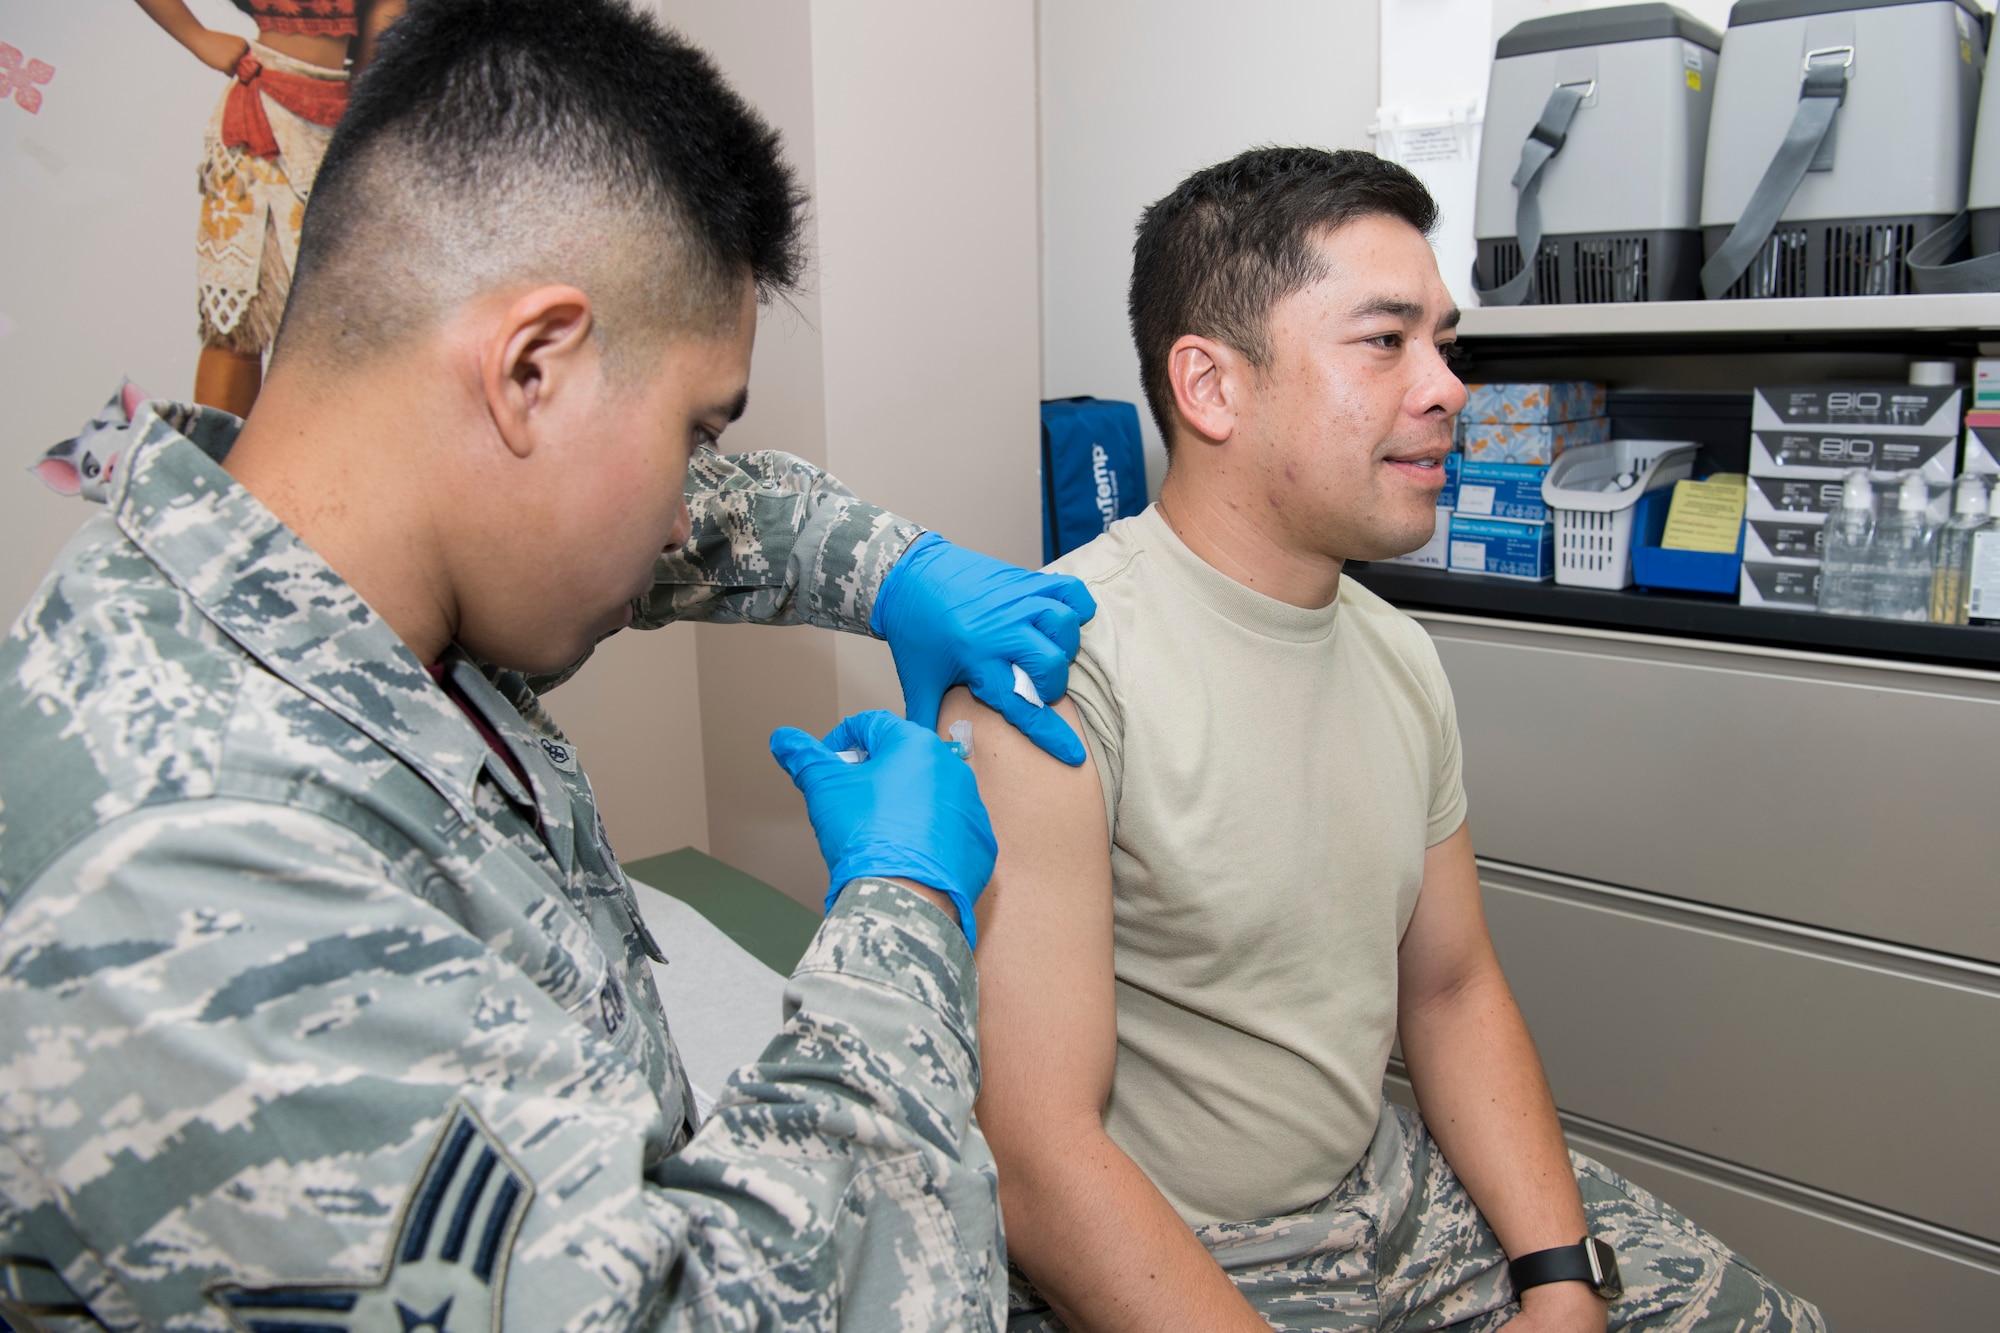 U.S. Air Force Senior Airman John Cortez, Air Force Reserve’s 624th Aerospace Medicine Flight immunizations backup technician, administers a vaccination to Airman 1st Class Ryan Martinez, Air National Guard’s 254th Air Base Group client systems specialist, as part of individual medical readiness requirements during a unit training assembly at Andersen Air Force Base, Guam, June 3, 2018.